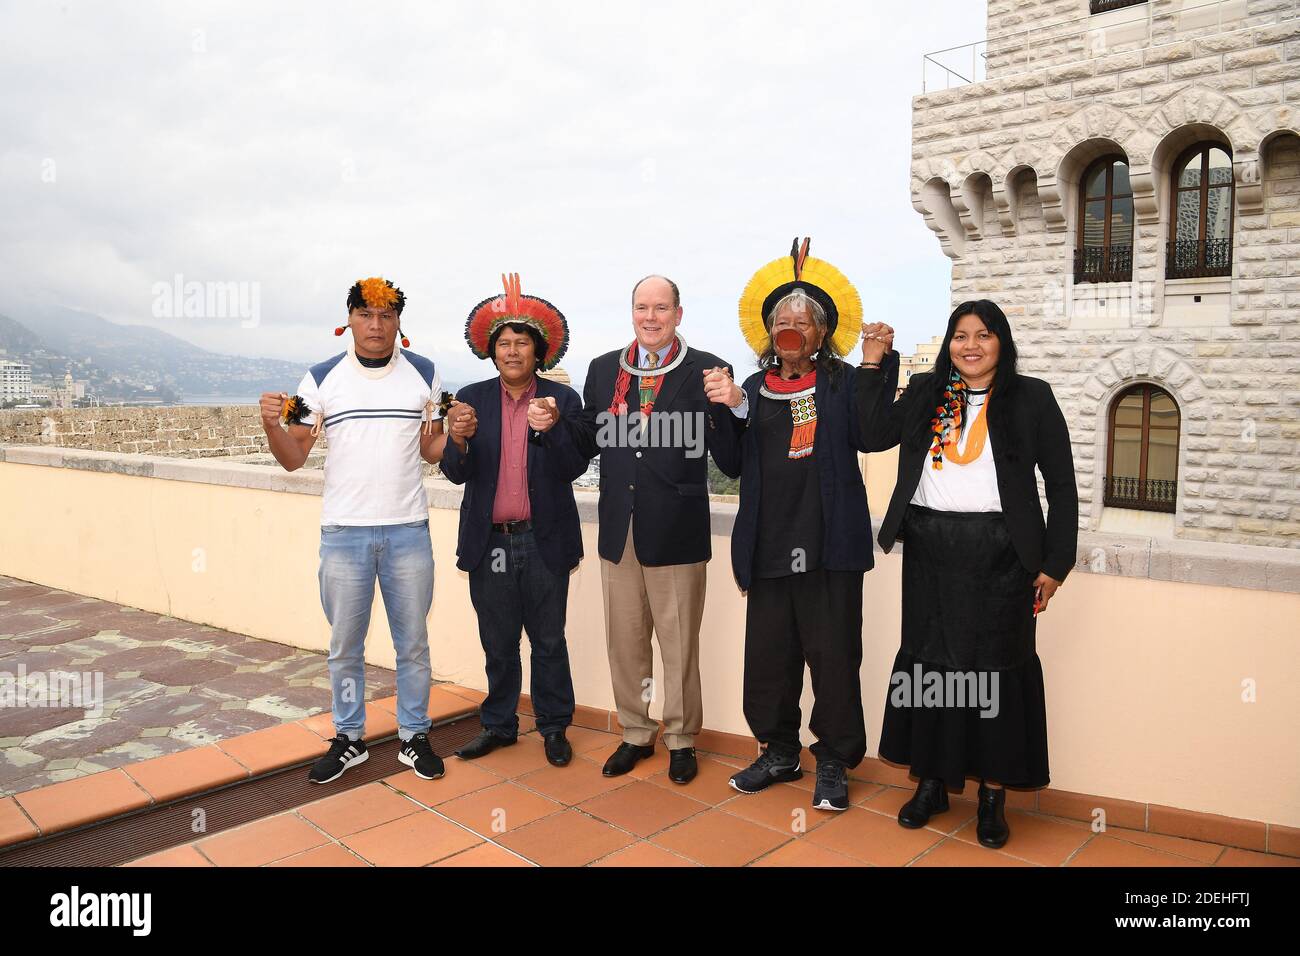 Prince Albert II of Monaco poses with Amazon rainforest and indigenous  culture Brazil's indigenous chief Raoni Metuktire, Chief Papy, Bemoro  Metuktire and Kalutu Kamakura after a working meeting at Royal Palace of